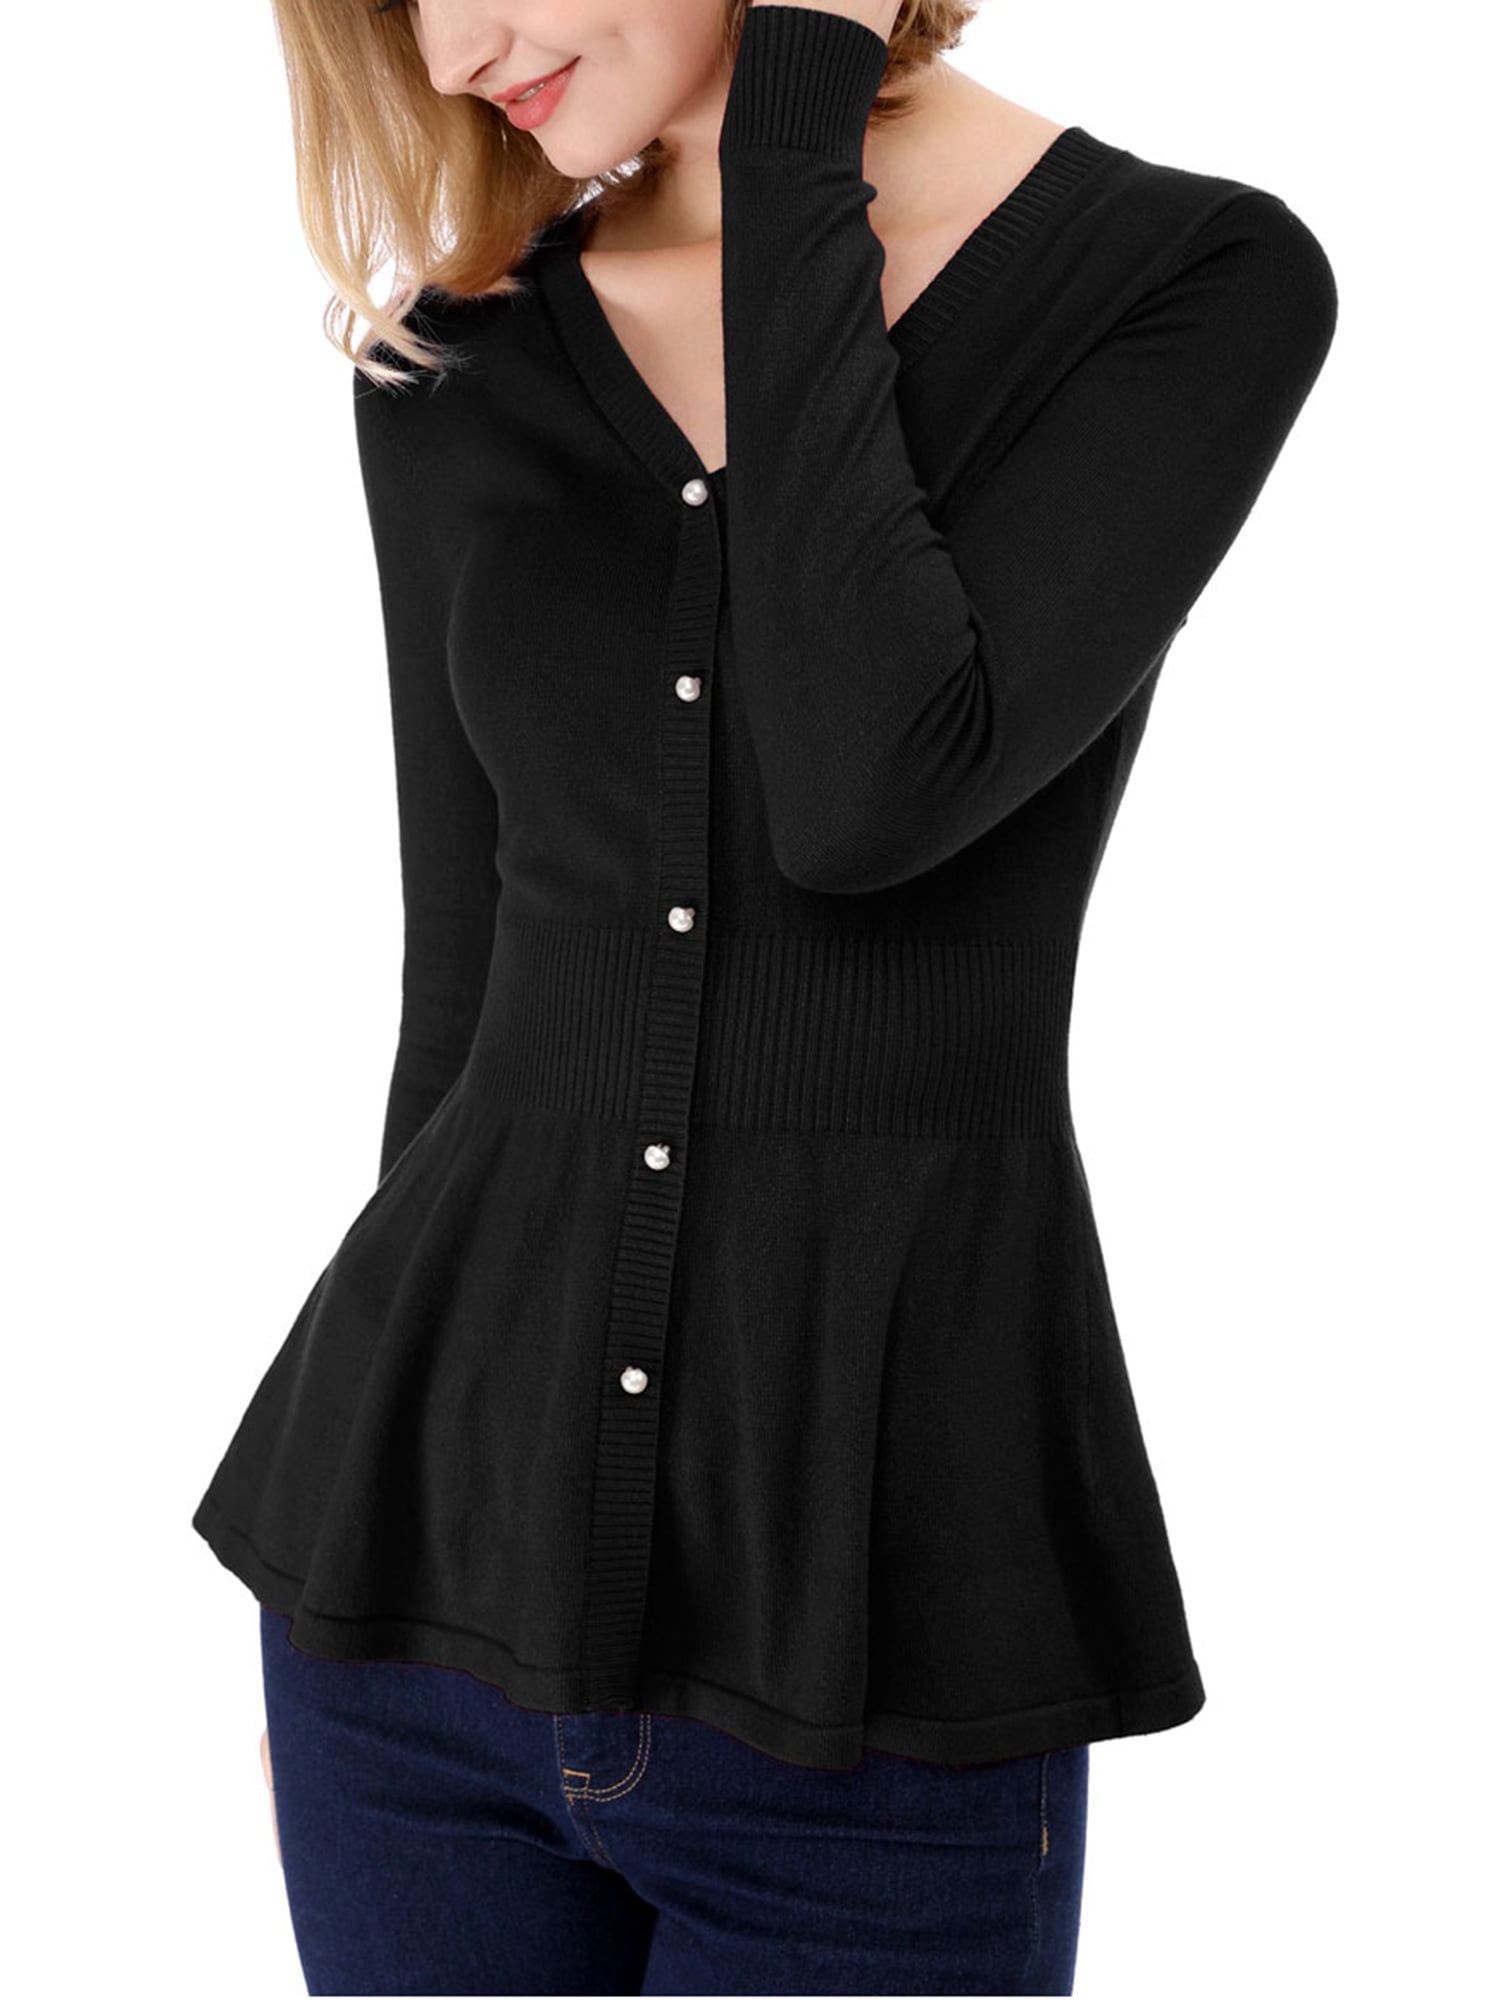 Unique Bargains Women's Peplum Top Smocked Long Sleeve Knit Sweater ...